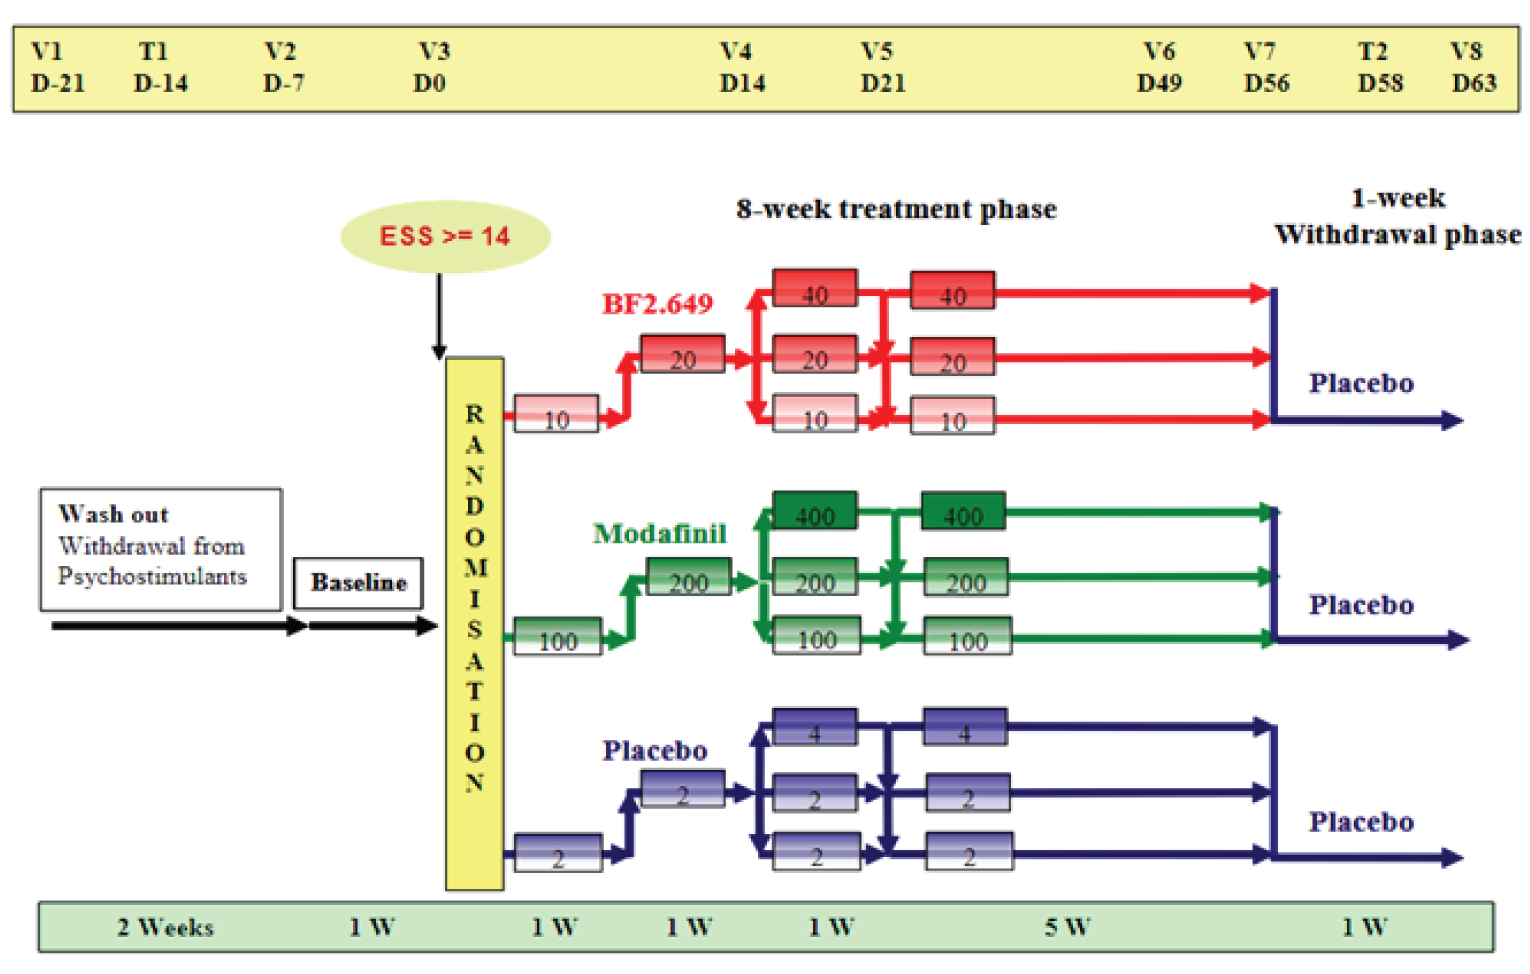 The flow of pitolisant hydrochloride, modafinil, or placebo dosage received by patients in the HARMONY 1 trial is demonstrated, from randomization to the end of study. Patients underwent dose titration for 3 weeks and a final 5-week maximum dose period (highest dose reached and tolerated). The treatment period was followed by a 1-week withdrawal period, during which all patients received placebo.